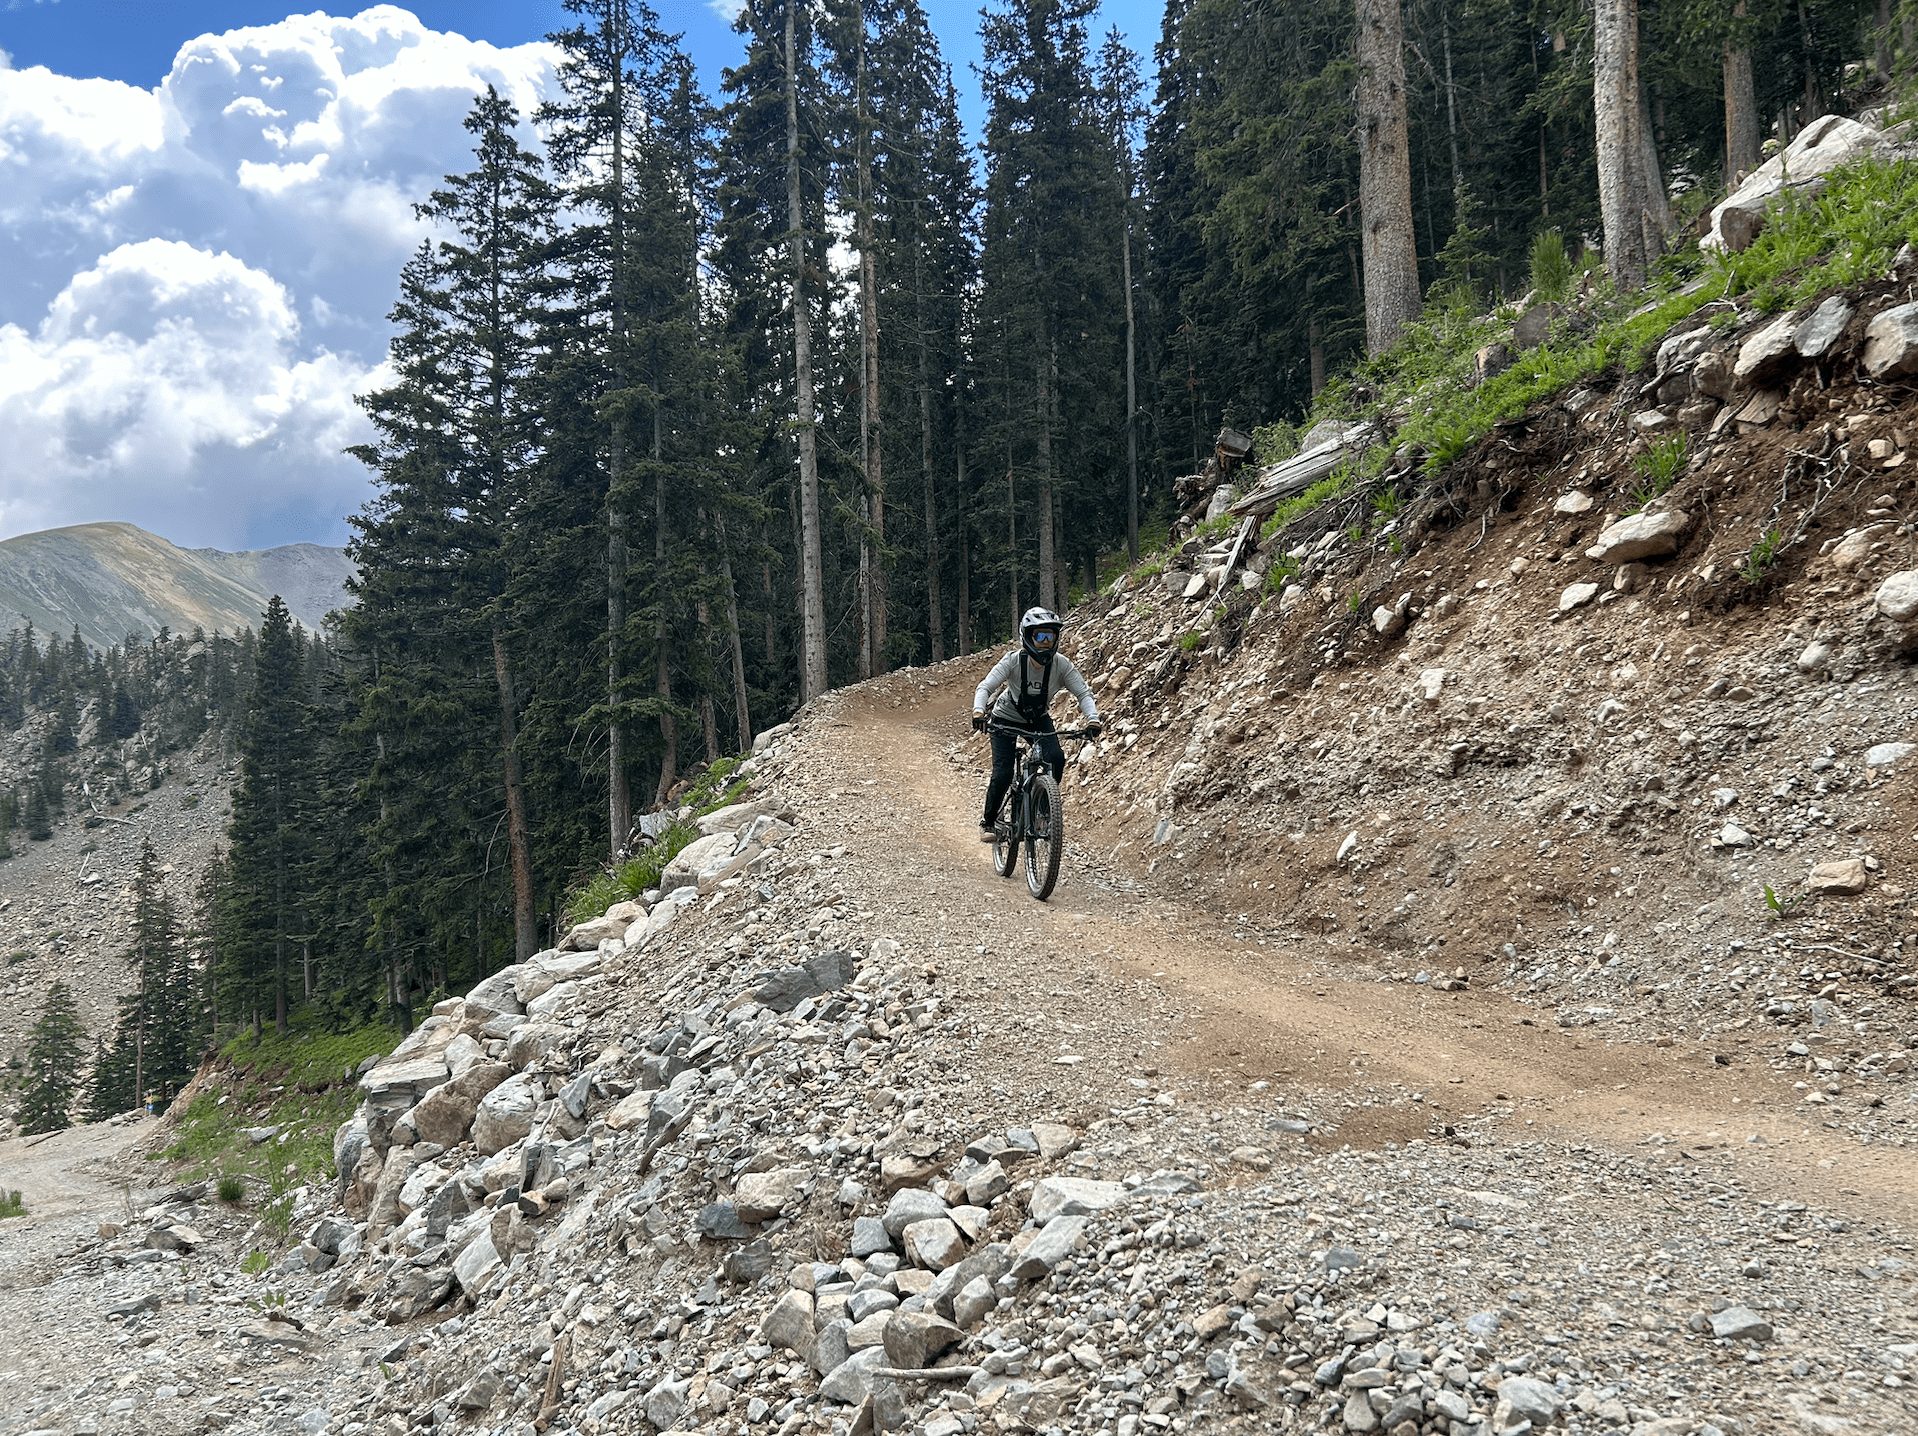 Taos, NM, Bike Park Report: Spice Up Your Summer With a Visit to New Mexico – SnowBrains